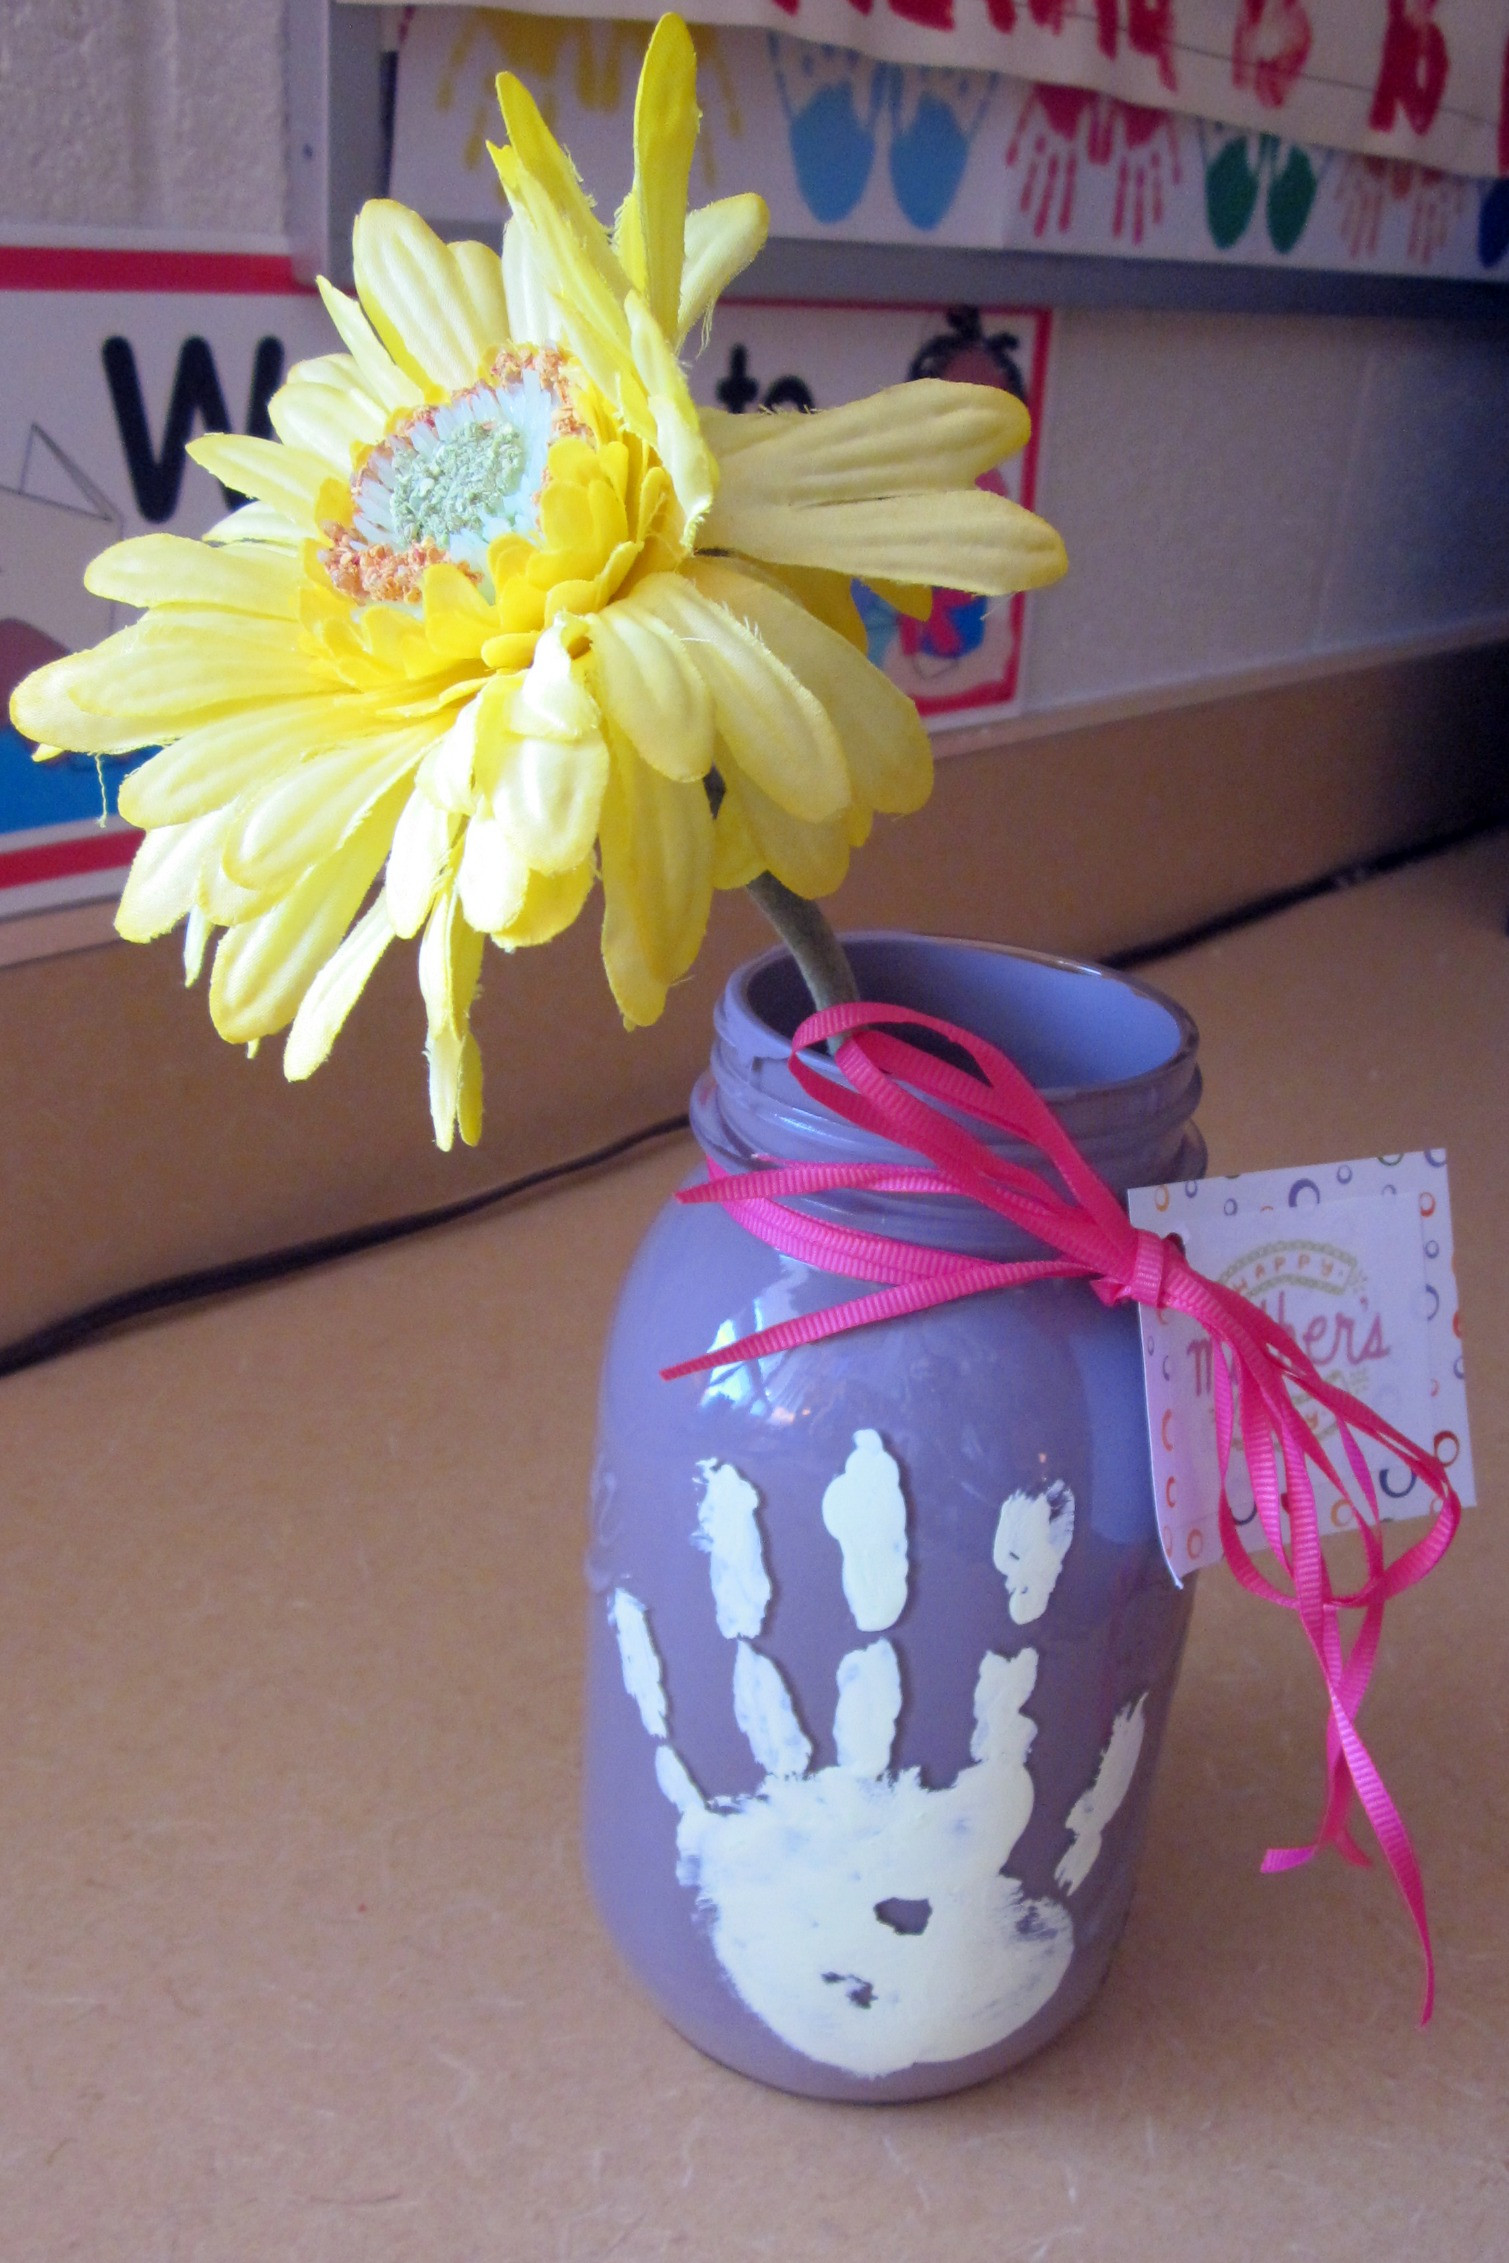 Mothers Day Ideas Crafts
 Mothers Day Ideas for kids mason jar vase